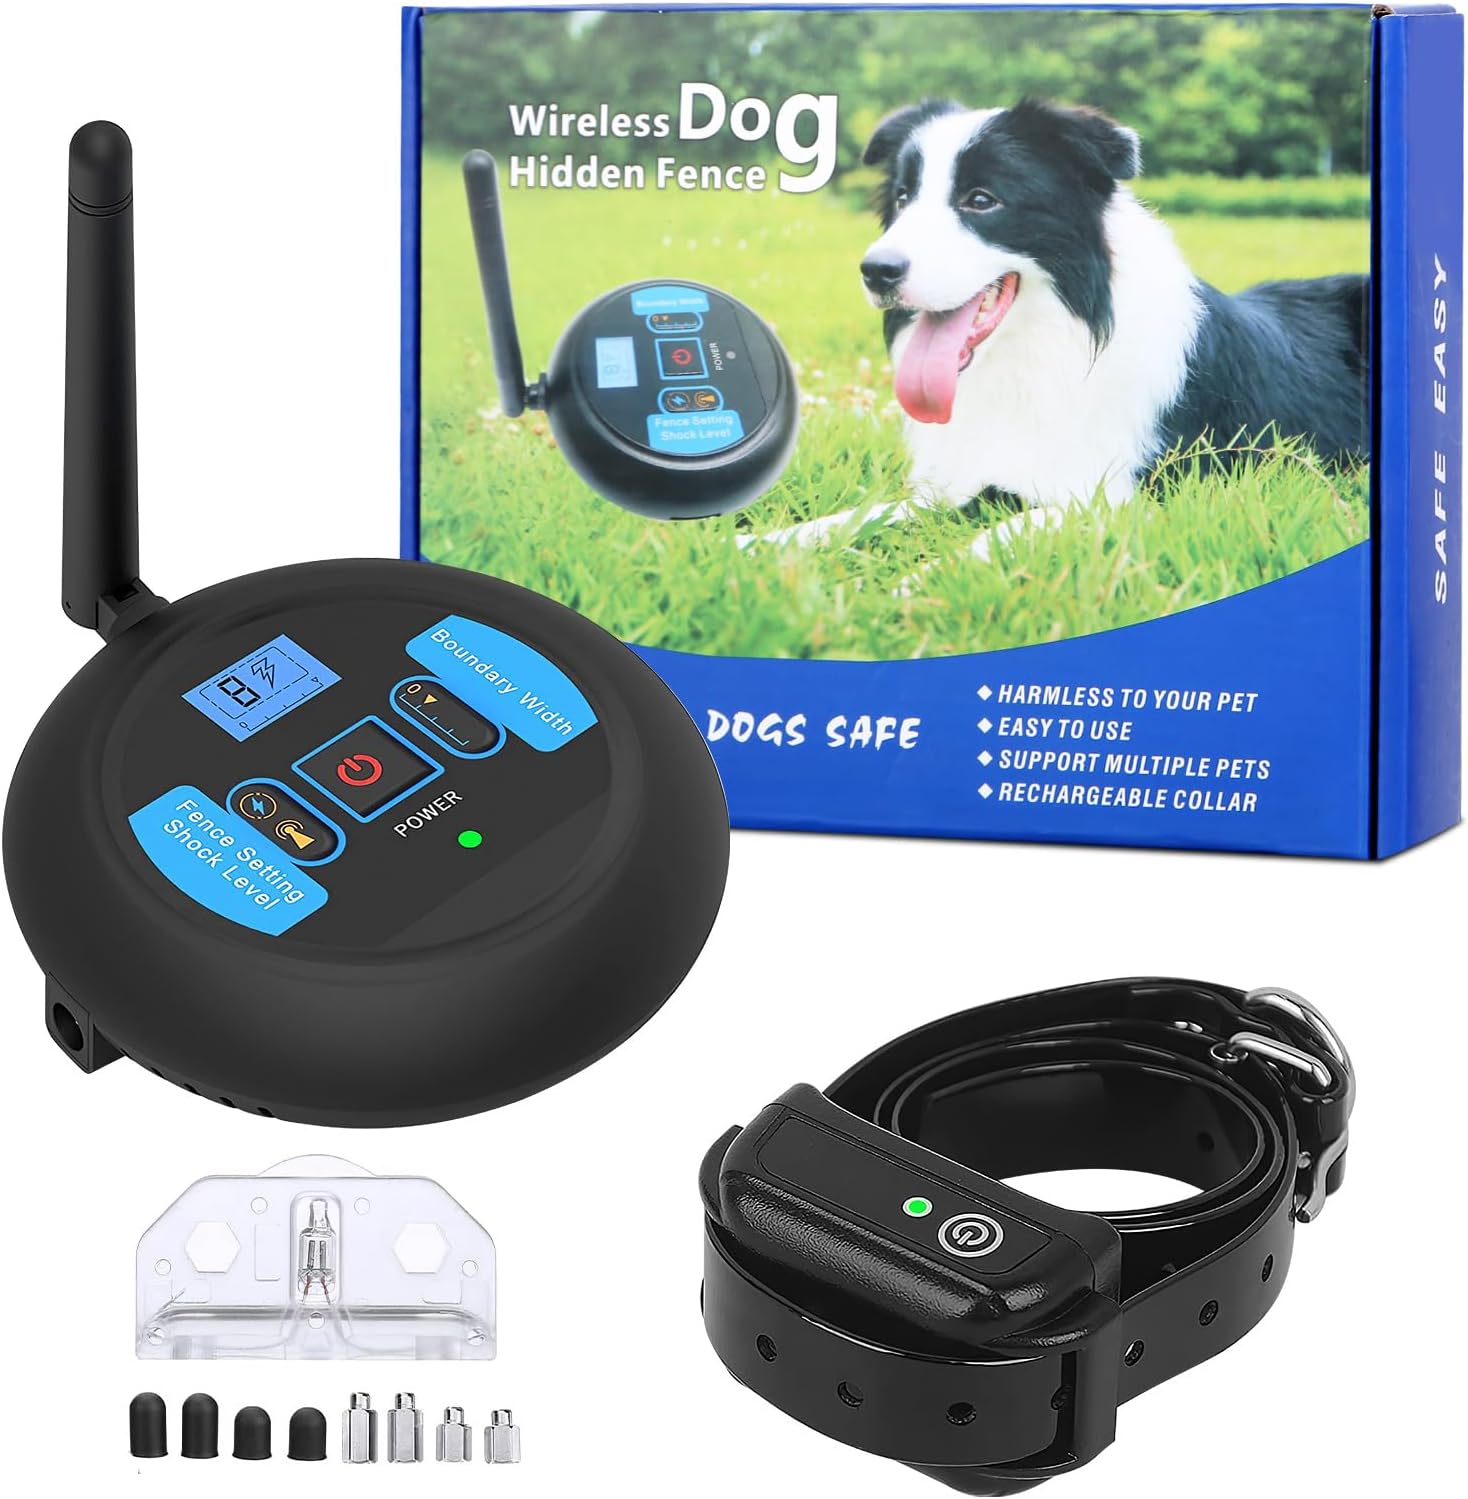 Rivulet Electric Wireless Dog Fence System Electric Fence Automatic Trigger Pet Shock Containment Boundary System Adjustable Range Up to 722ft-IPX8 Waterproof Rechargeable Collar, Small Medium Large